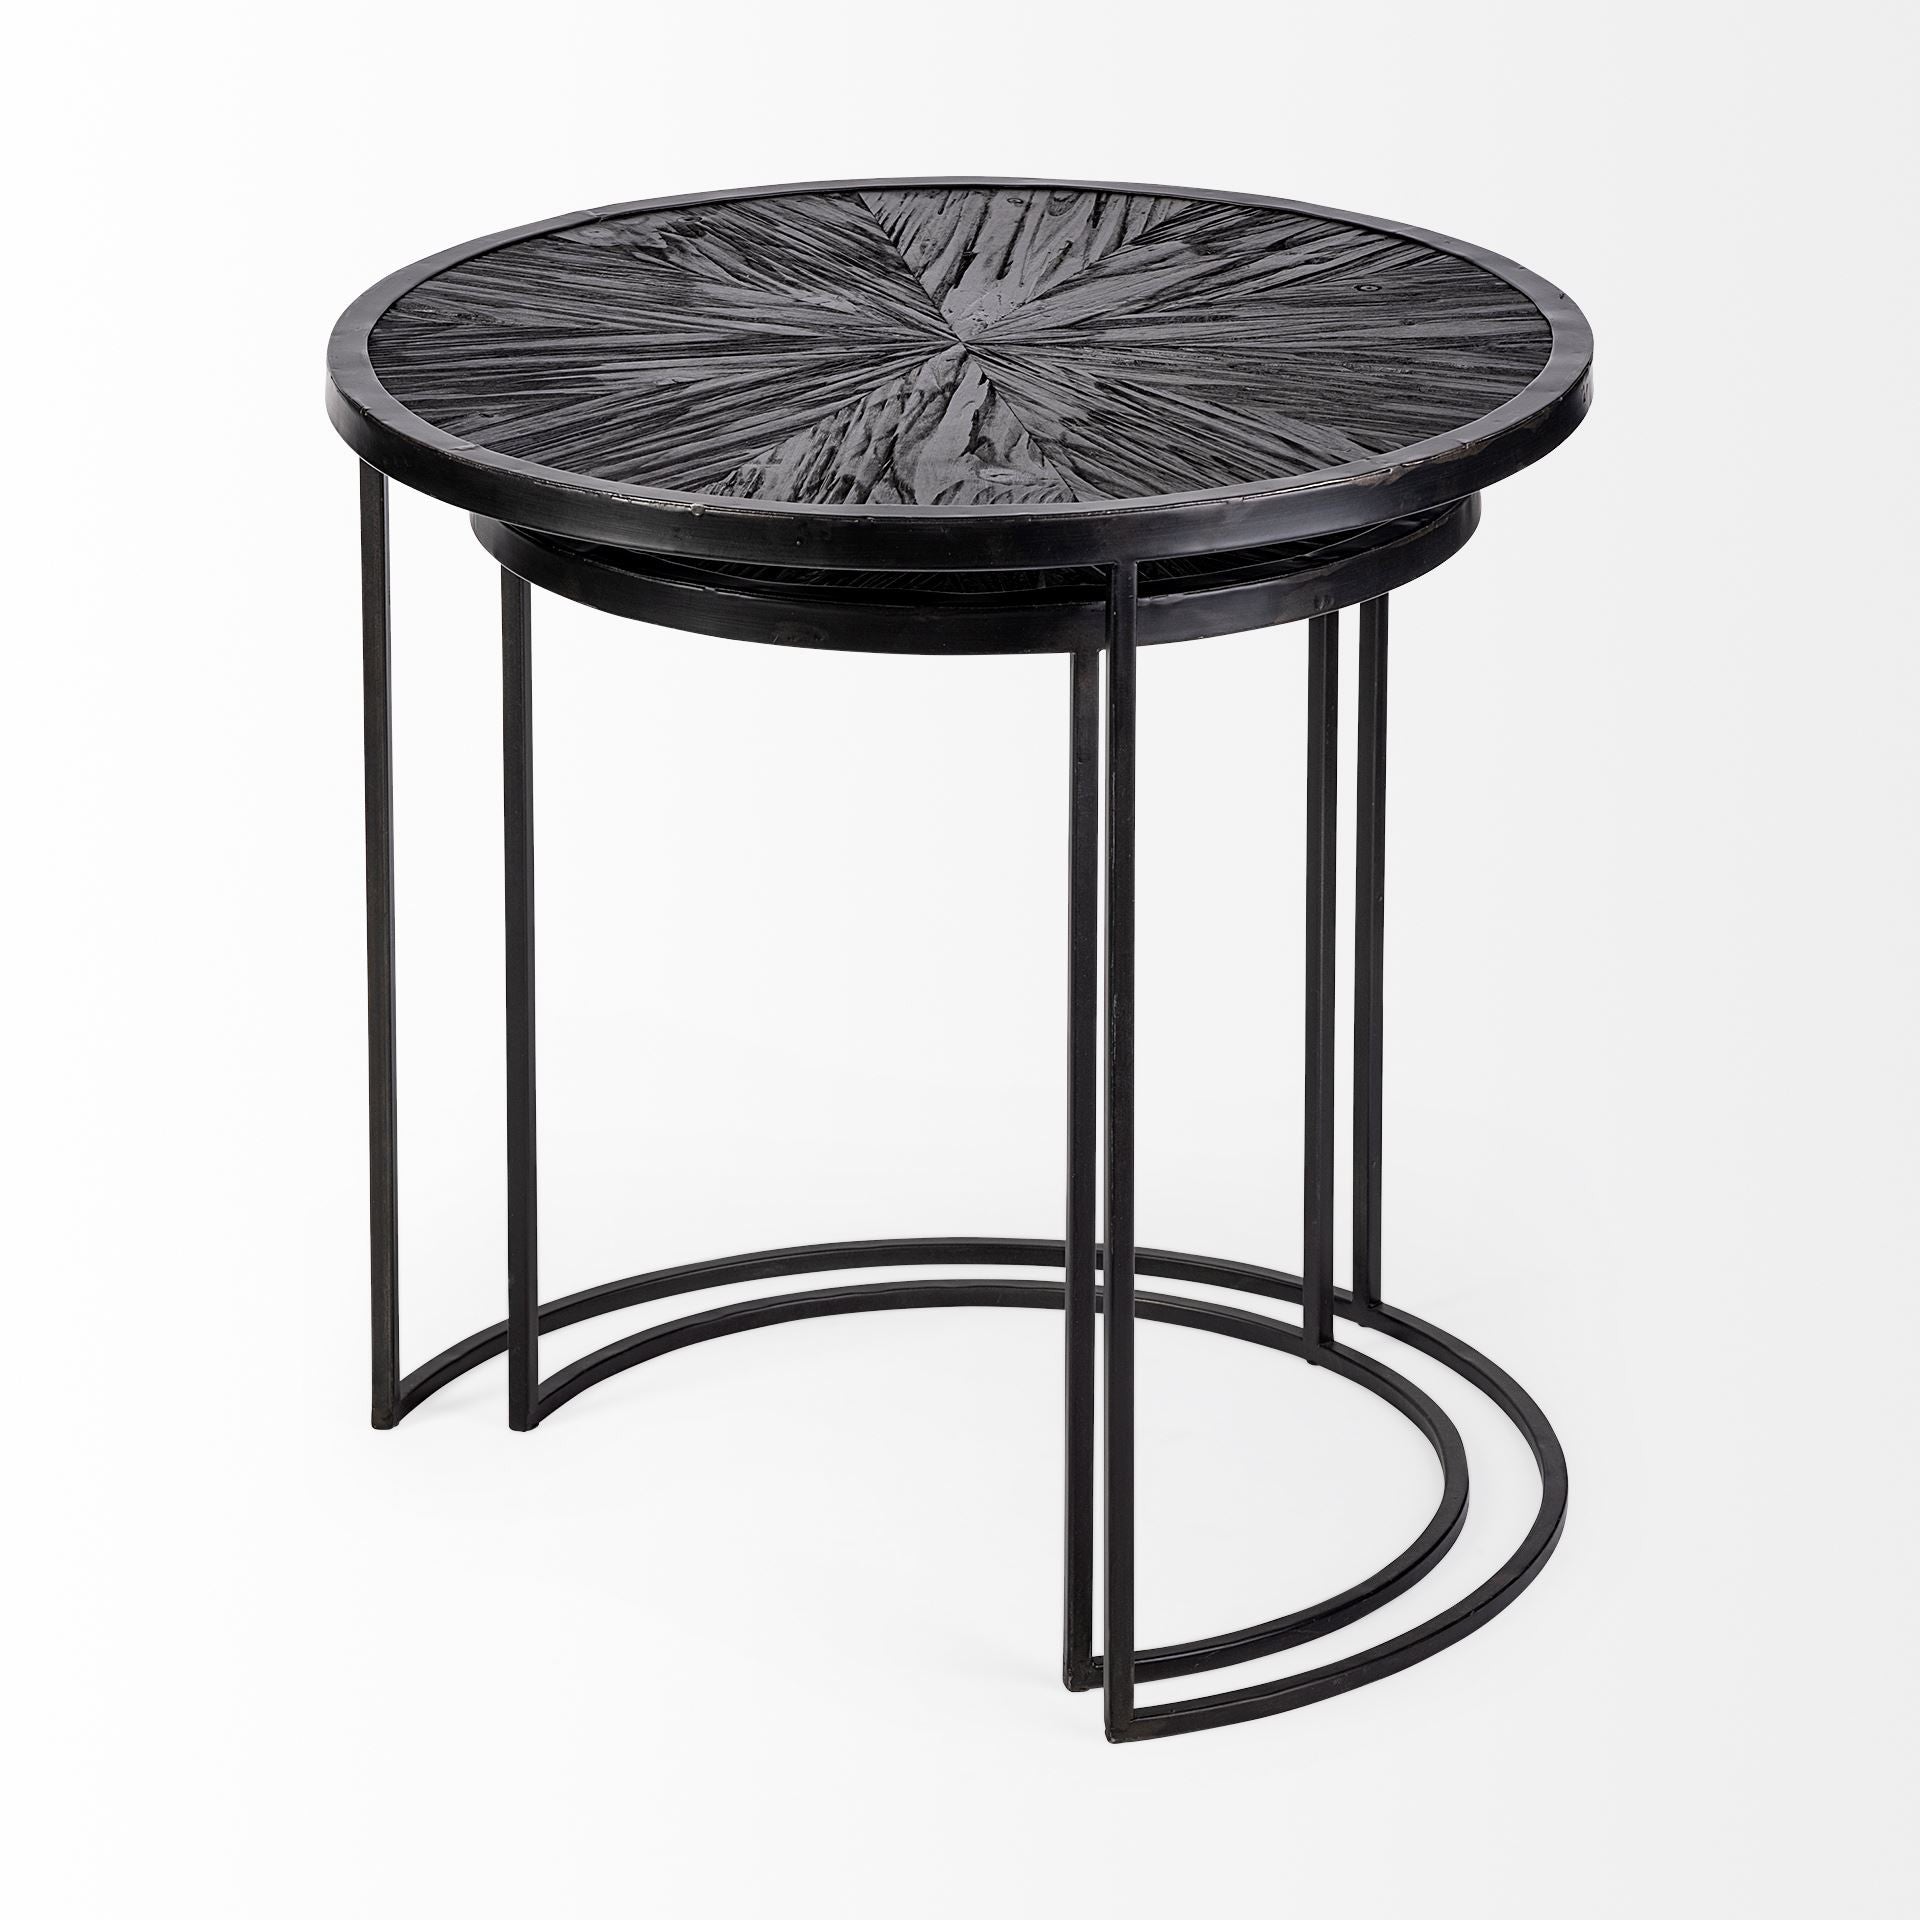 Set Of 2 Dark Wood Round Top Accent Tables With Black Iron Frame